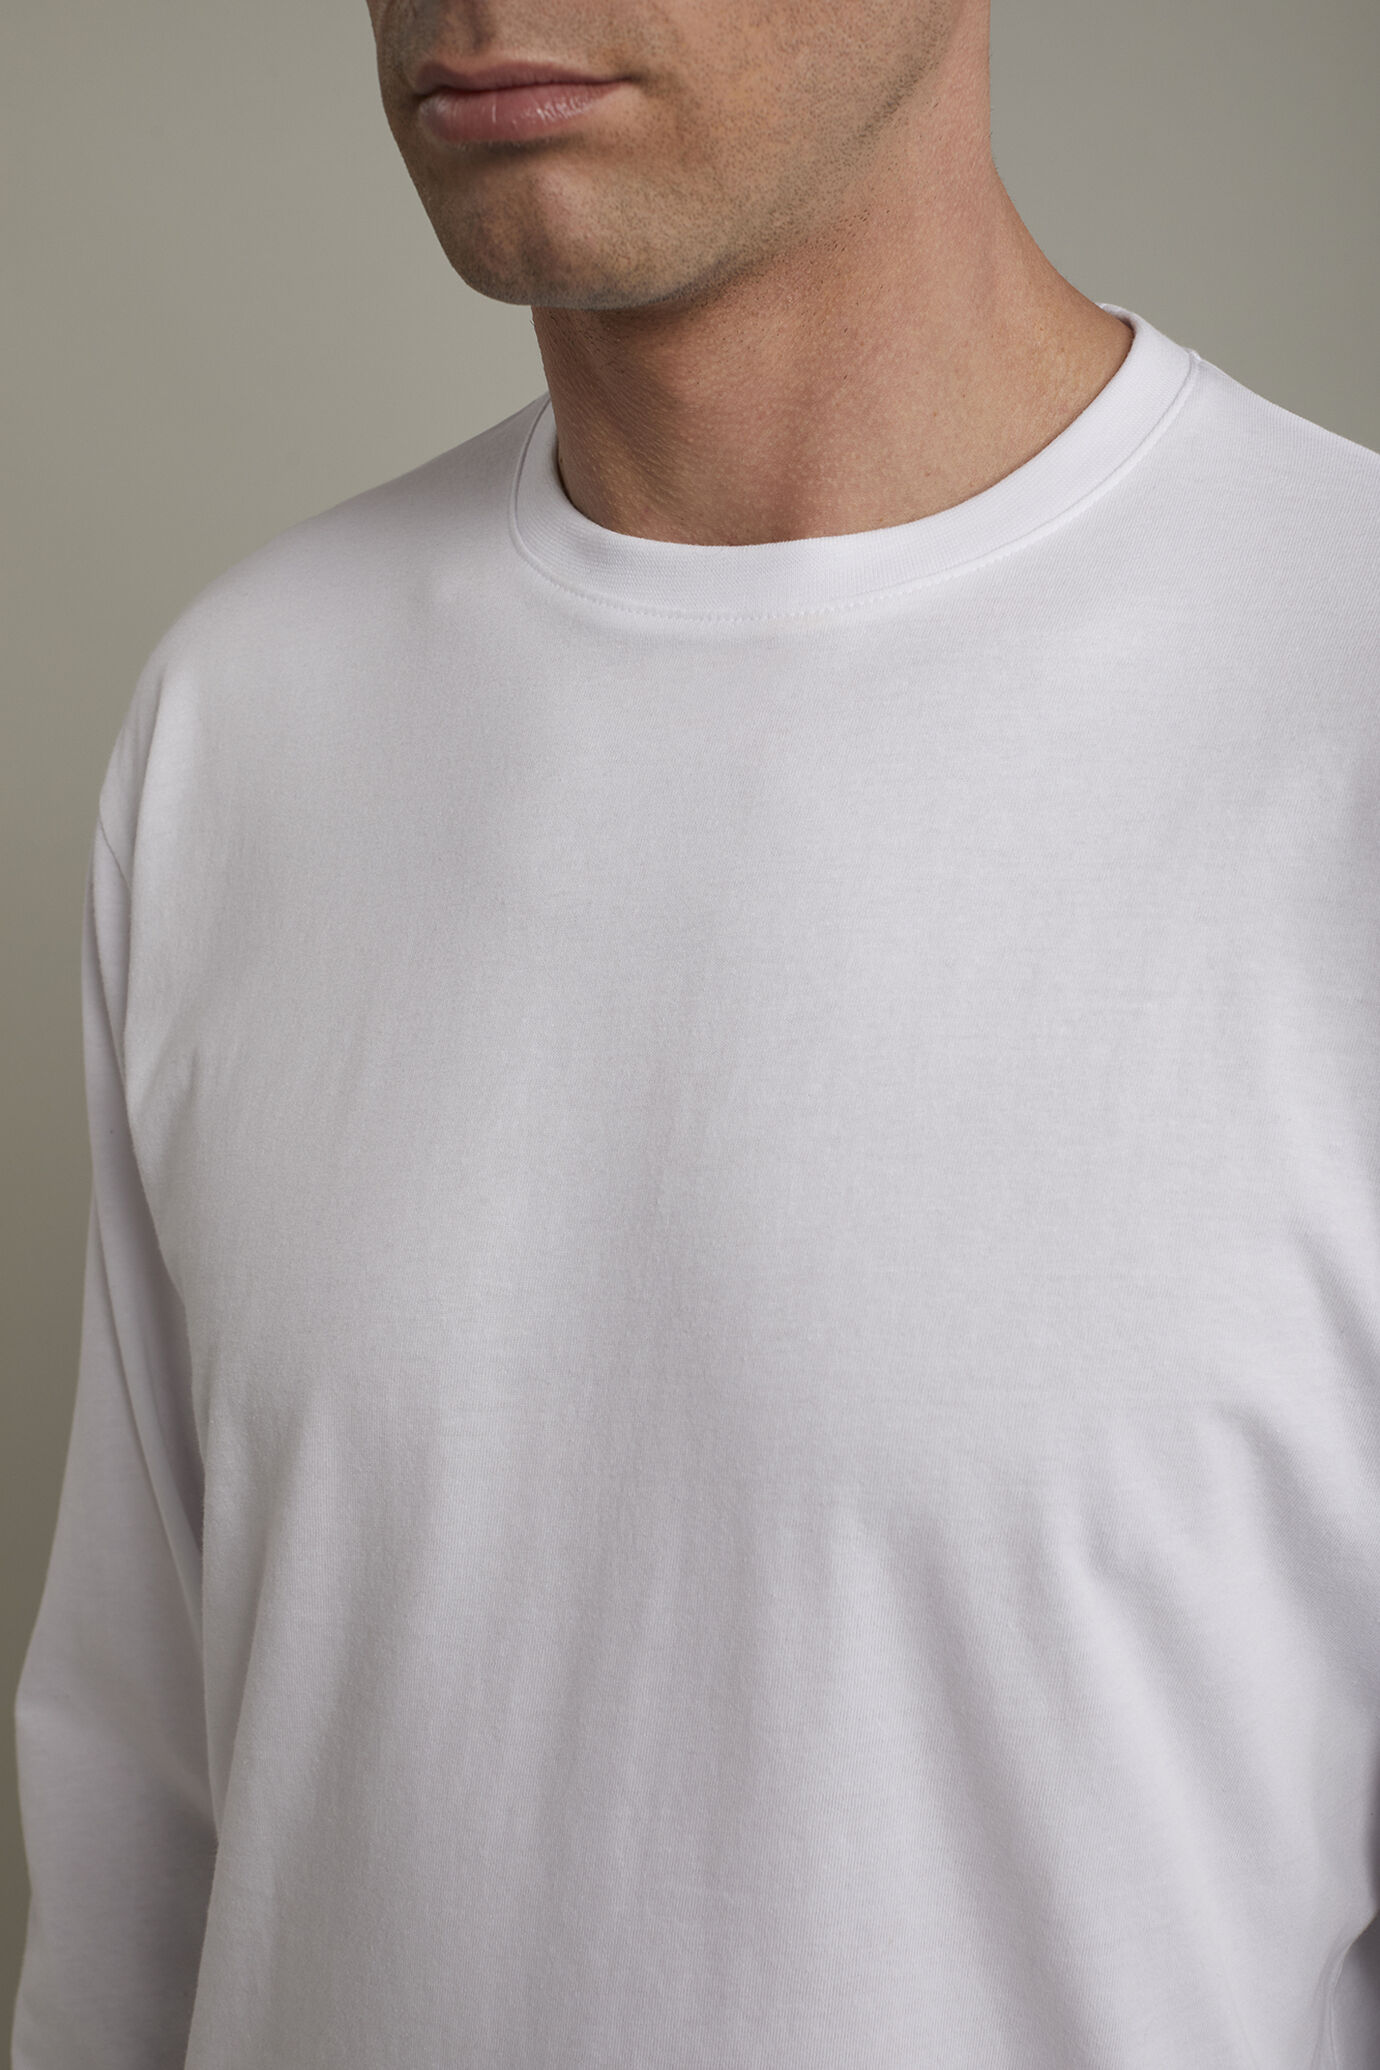 Men’s round neck t-shirt with long sleeves 100% cotton regular fit image number 3